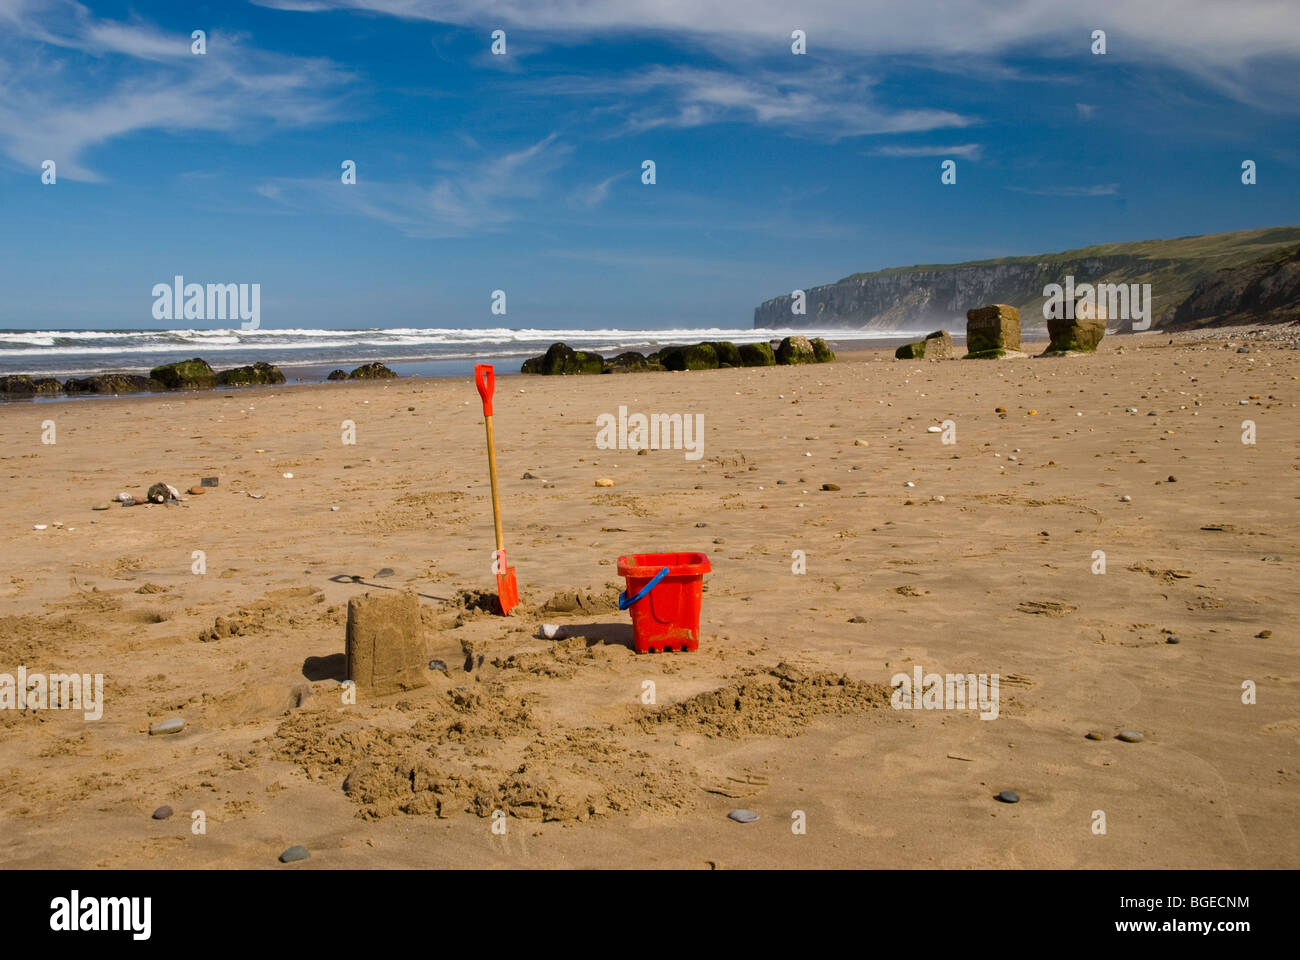 Typical summer beach scene on the sand a Filey Beach with Bempton Cliffs in the background. Stock Photo